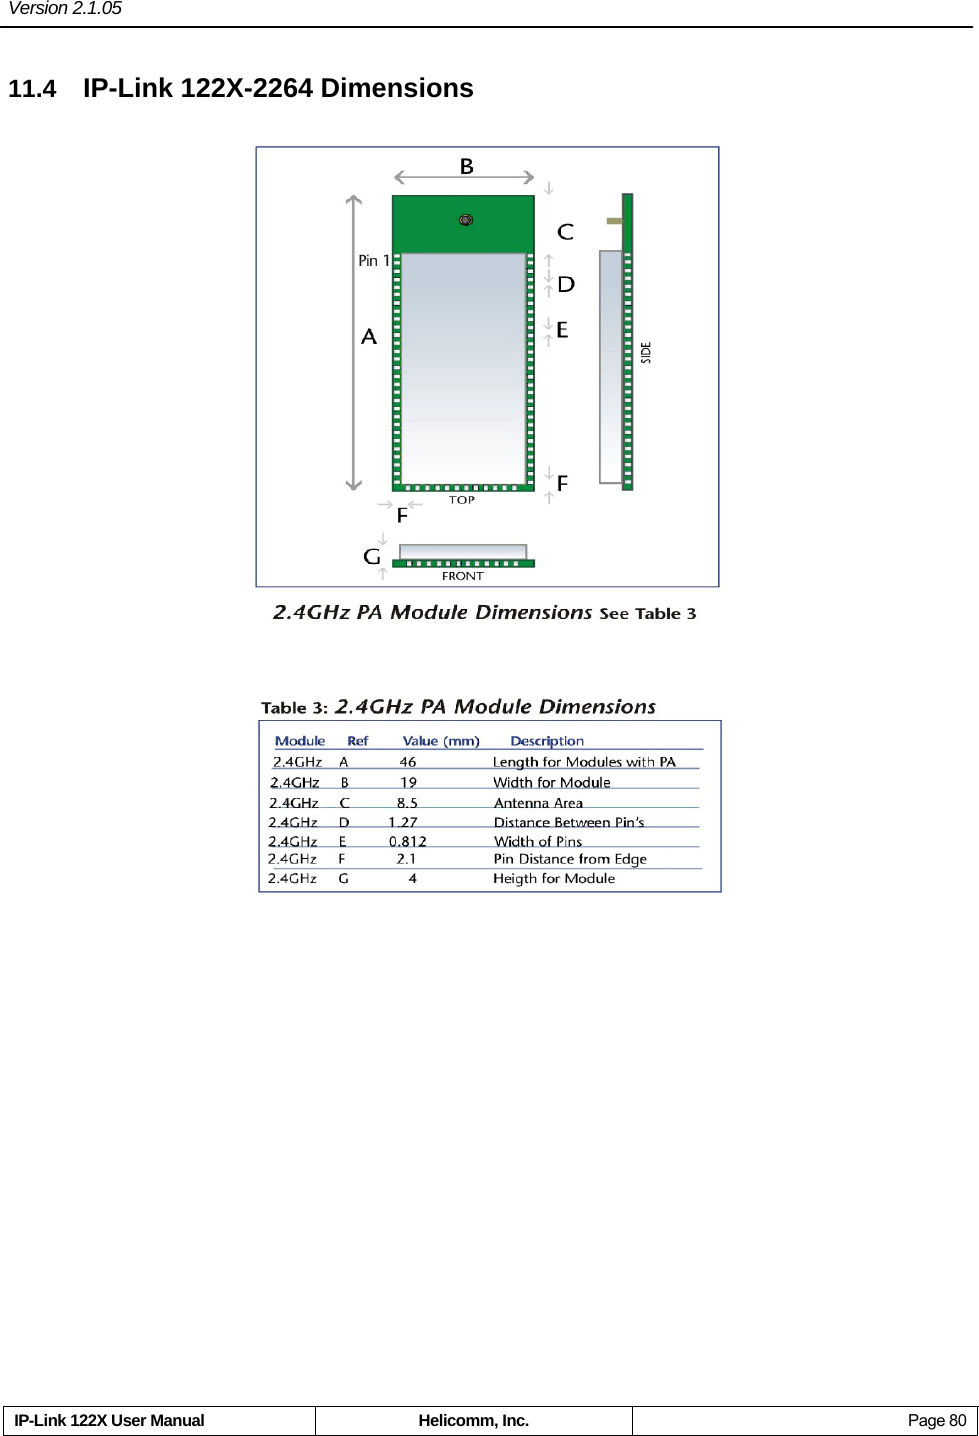 Version 2.1.05     IP-Link 122X User Manual  Helicomm, Inc.  Page 80 11.4  IP-Link 122X-2264 Dimensions                     